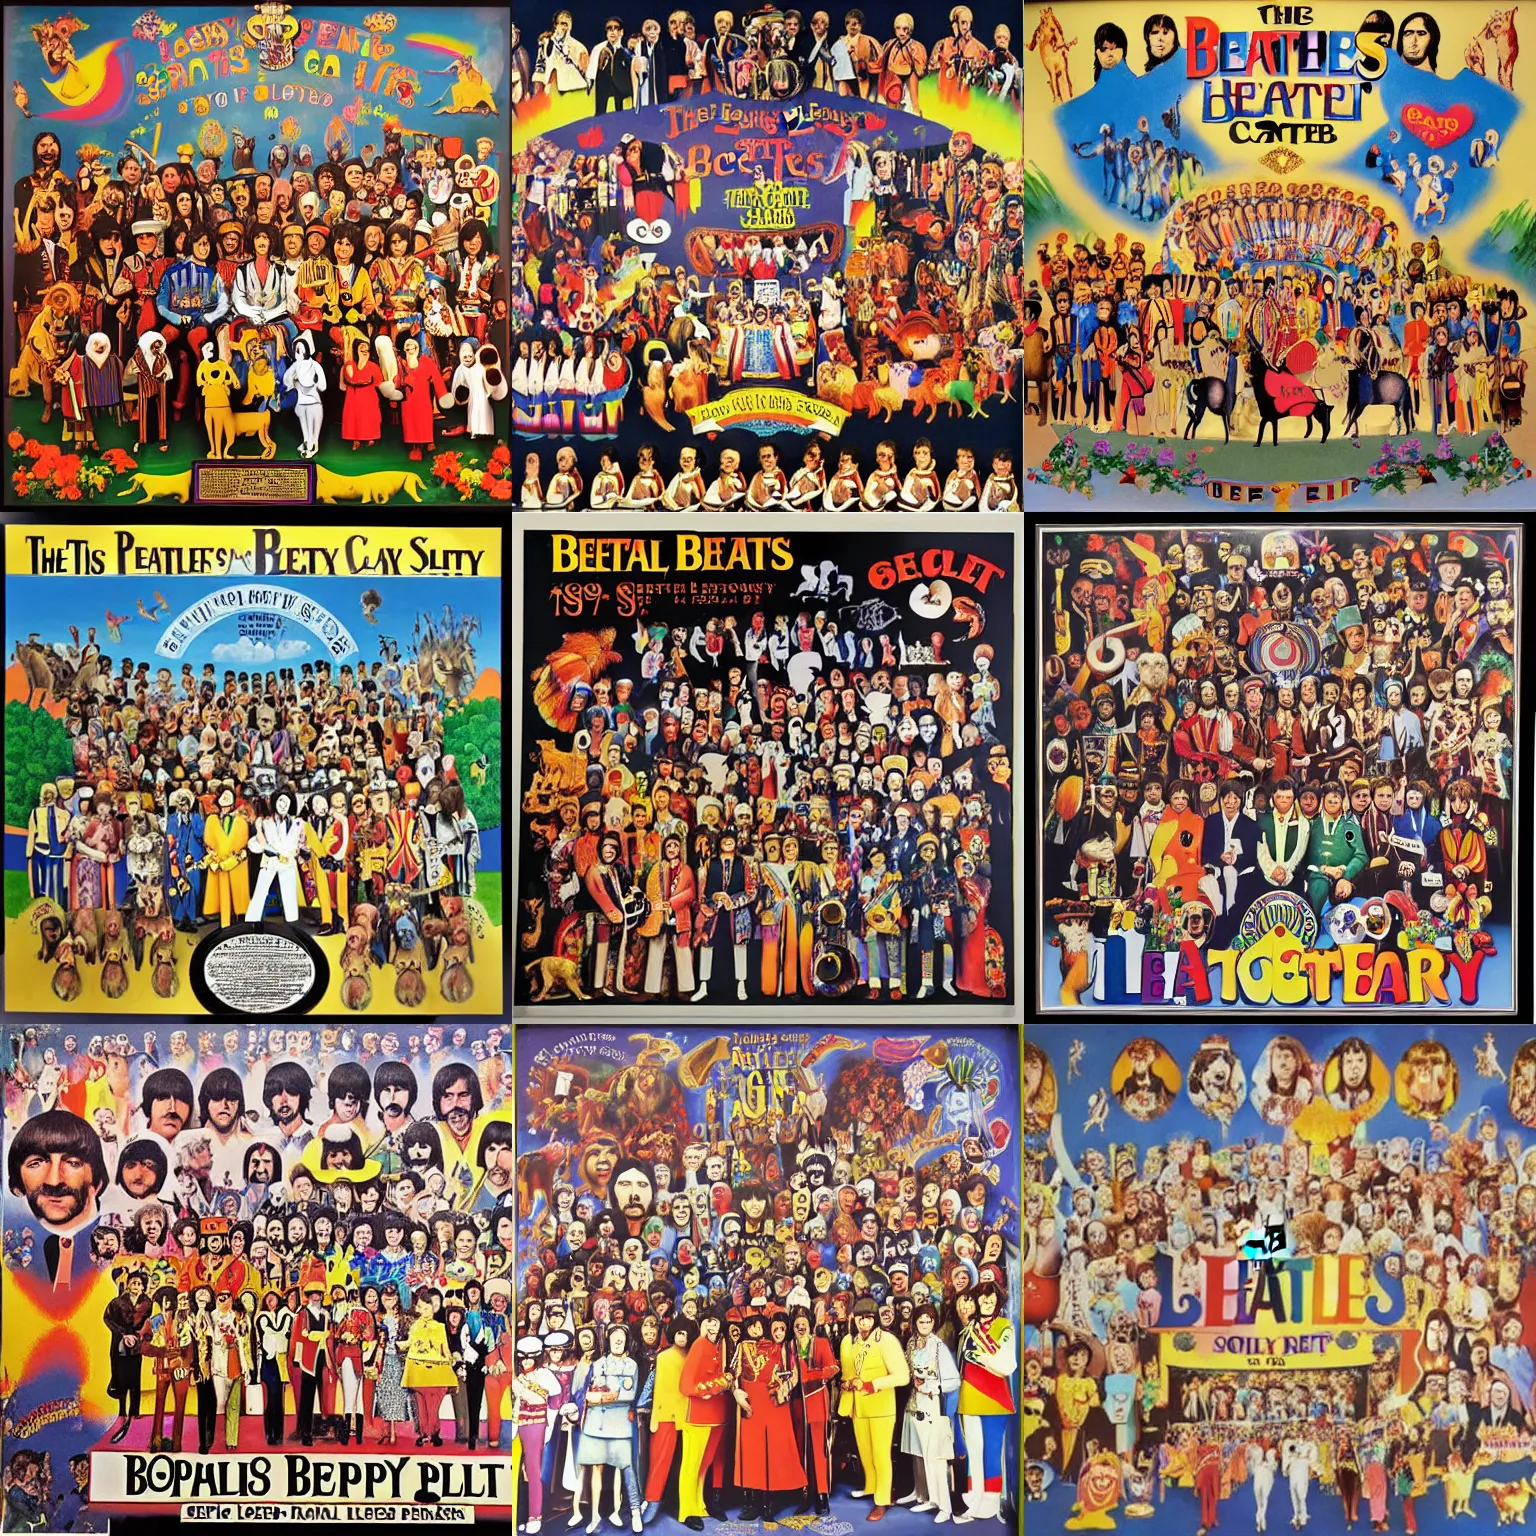 Prompt: the beatles sgt pepper's lonely hearts club band ( 1 9 6 7 ) album cover lascaux cave painting